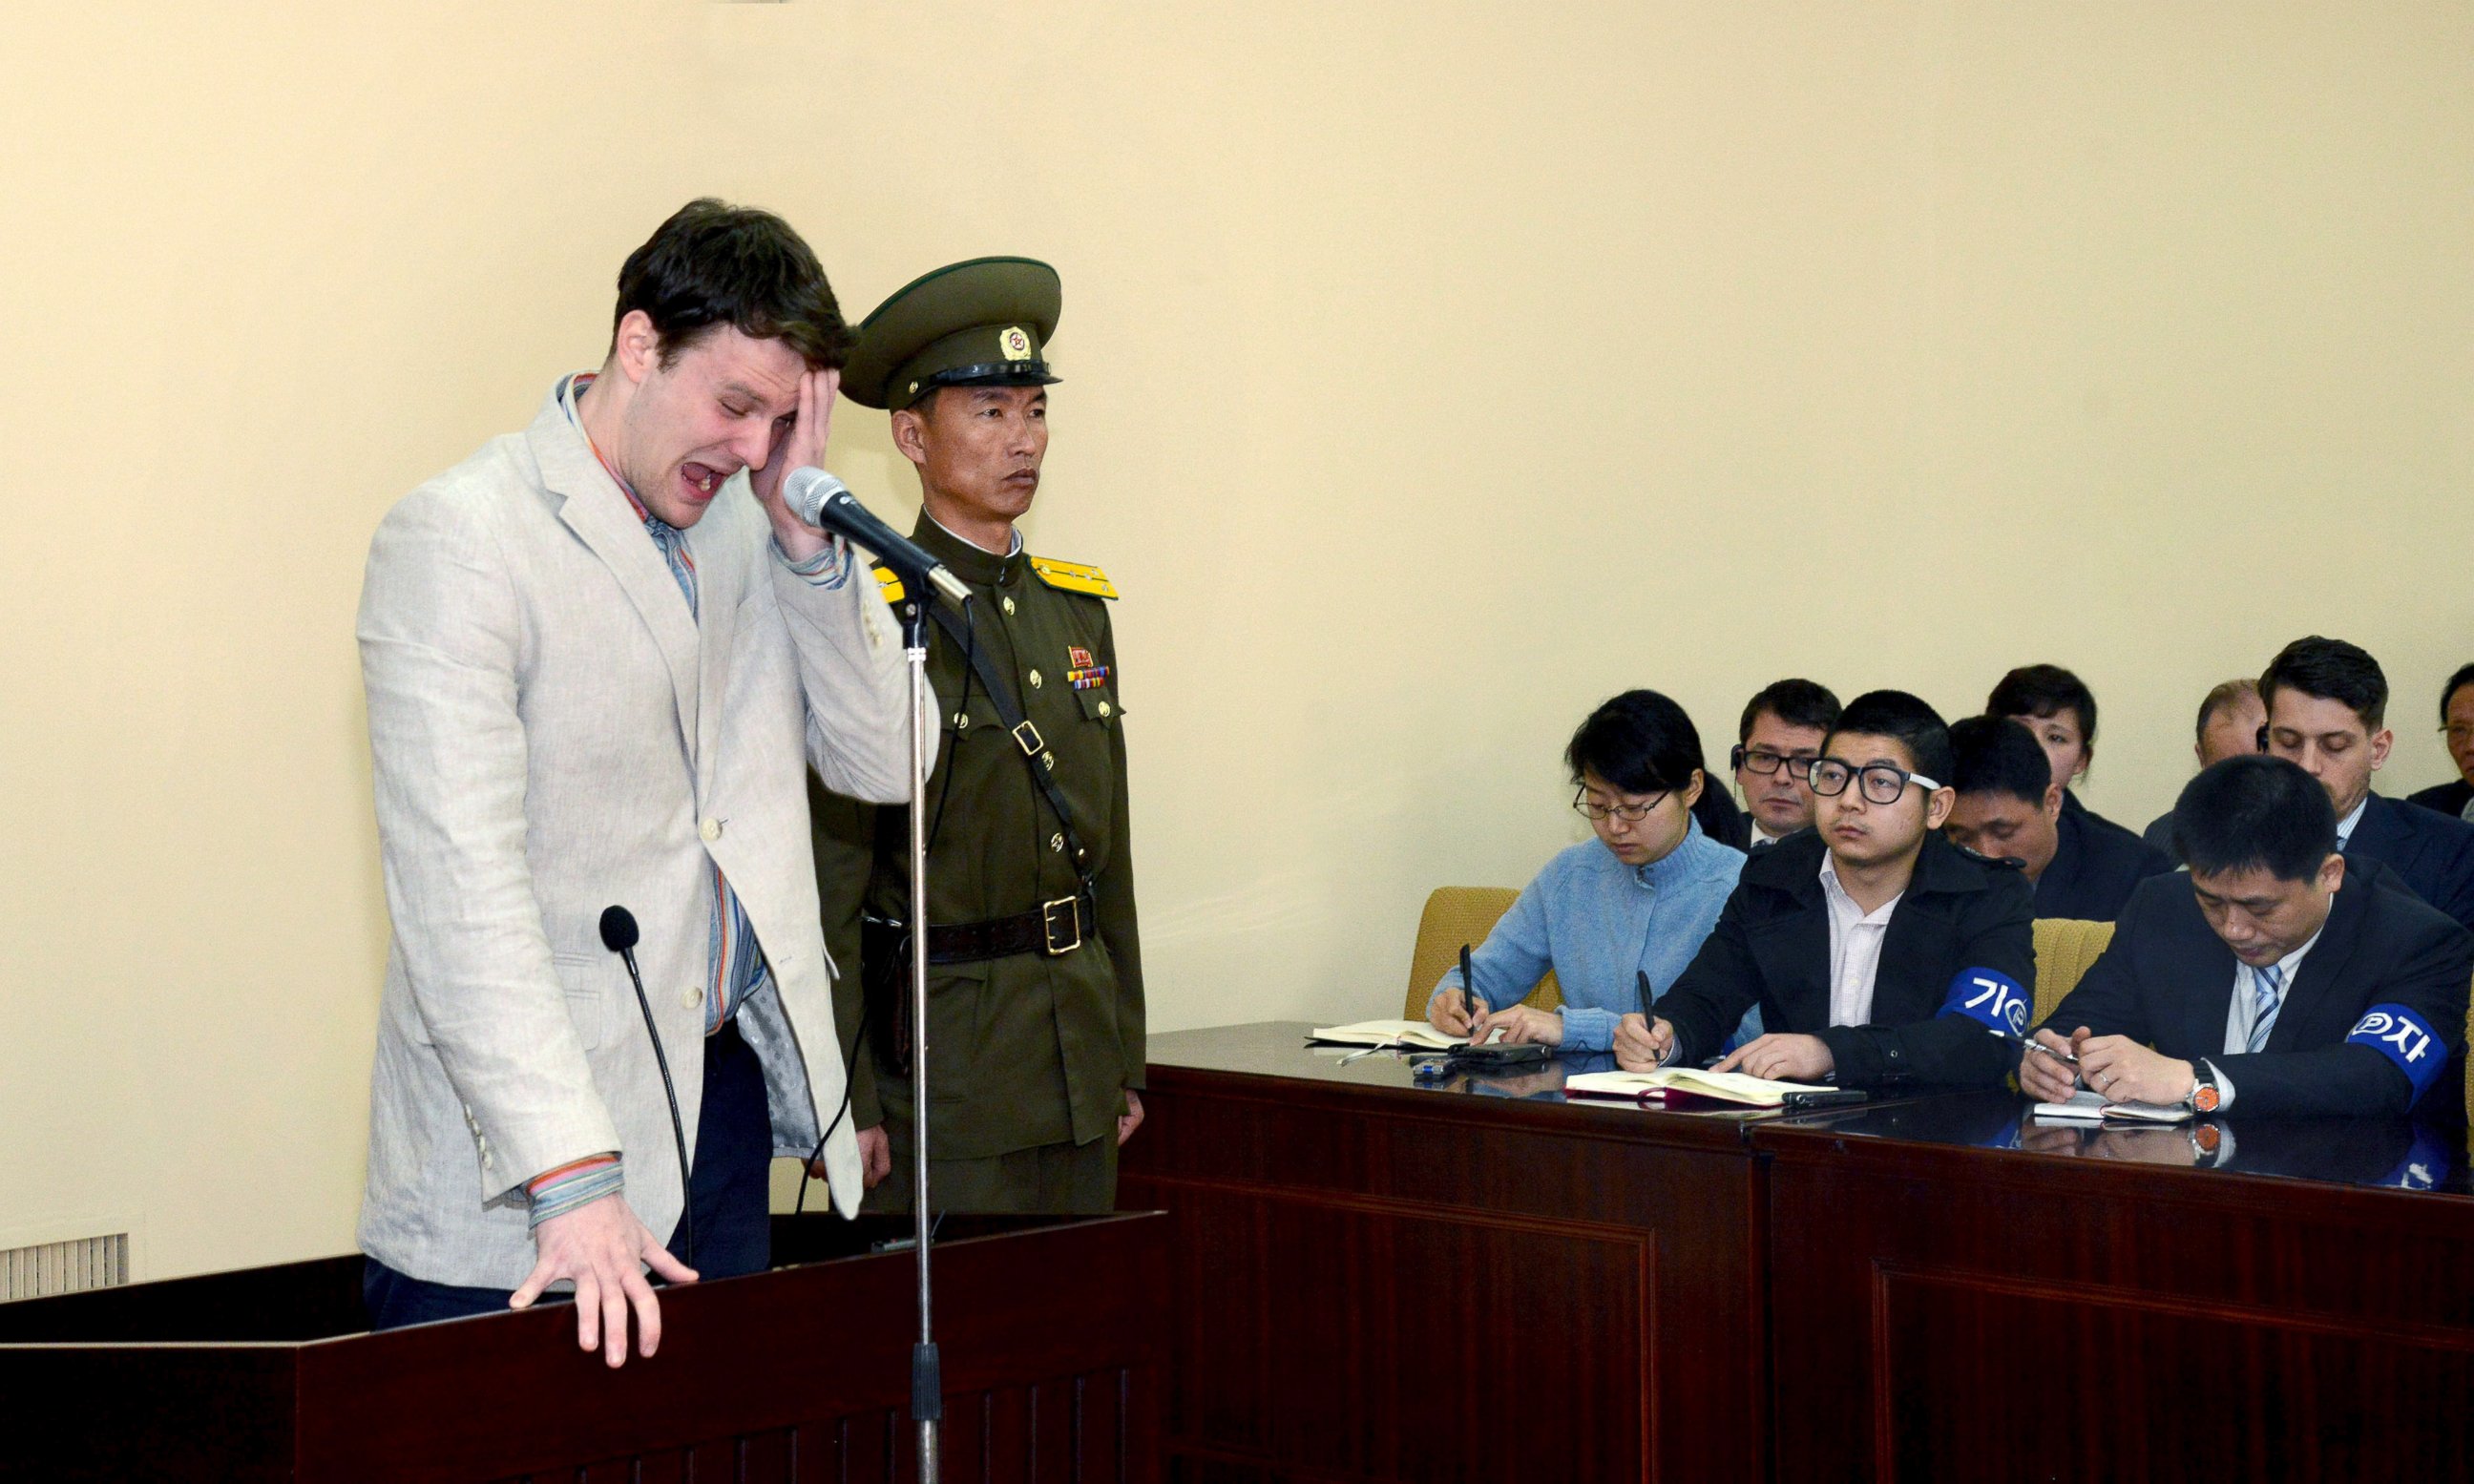 PHOTO: U.S. student Otto Warmbier cries at court in an undisclosed location in North Korea, in this photo released by North Korea's Korean Central News Agency (KCNA) in Pyongyang on March 16, 2016.